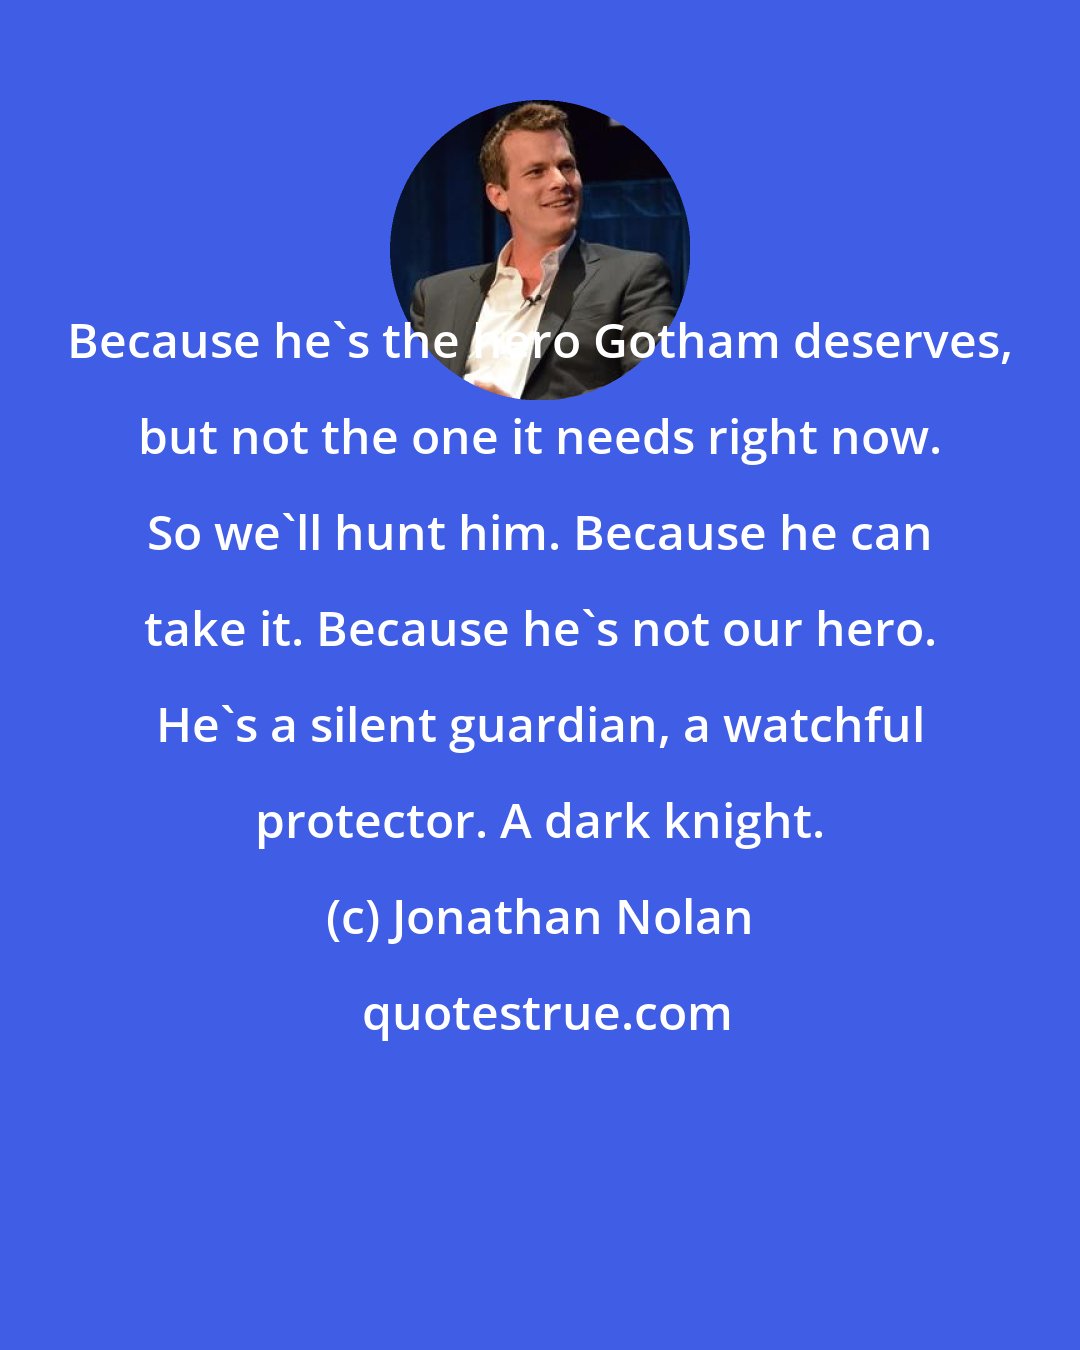 Jonathan Nolan: Because he's the hero Gotham deserves, but not the one it needs right now. So we'll hunt him. Because he can take it. Because he's not our hero. He's a silent guardian, a watchful protector. A dark knight.